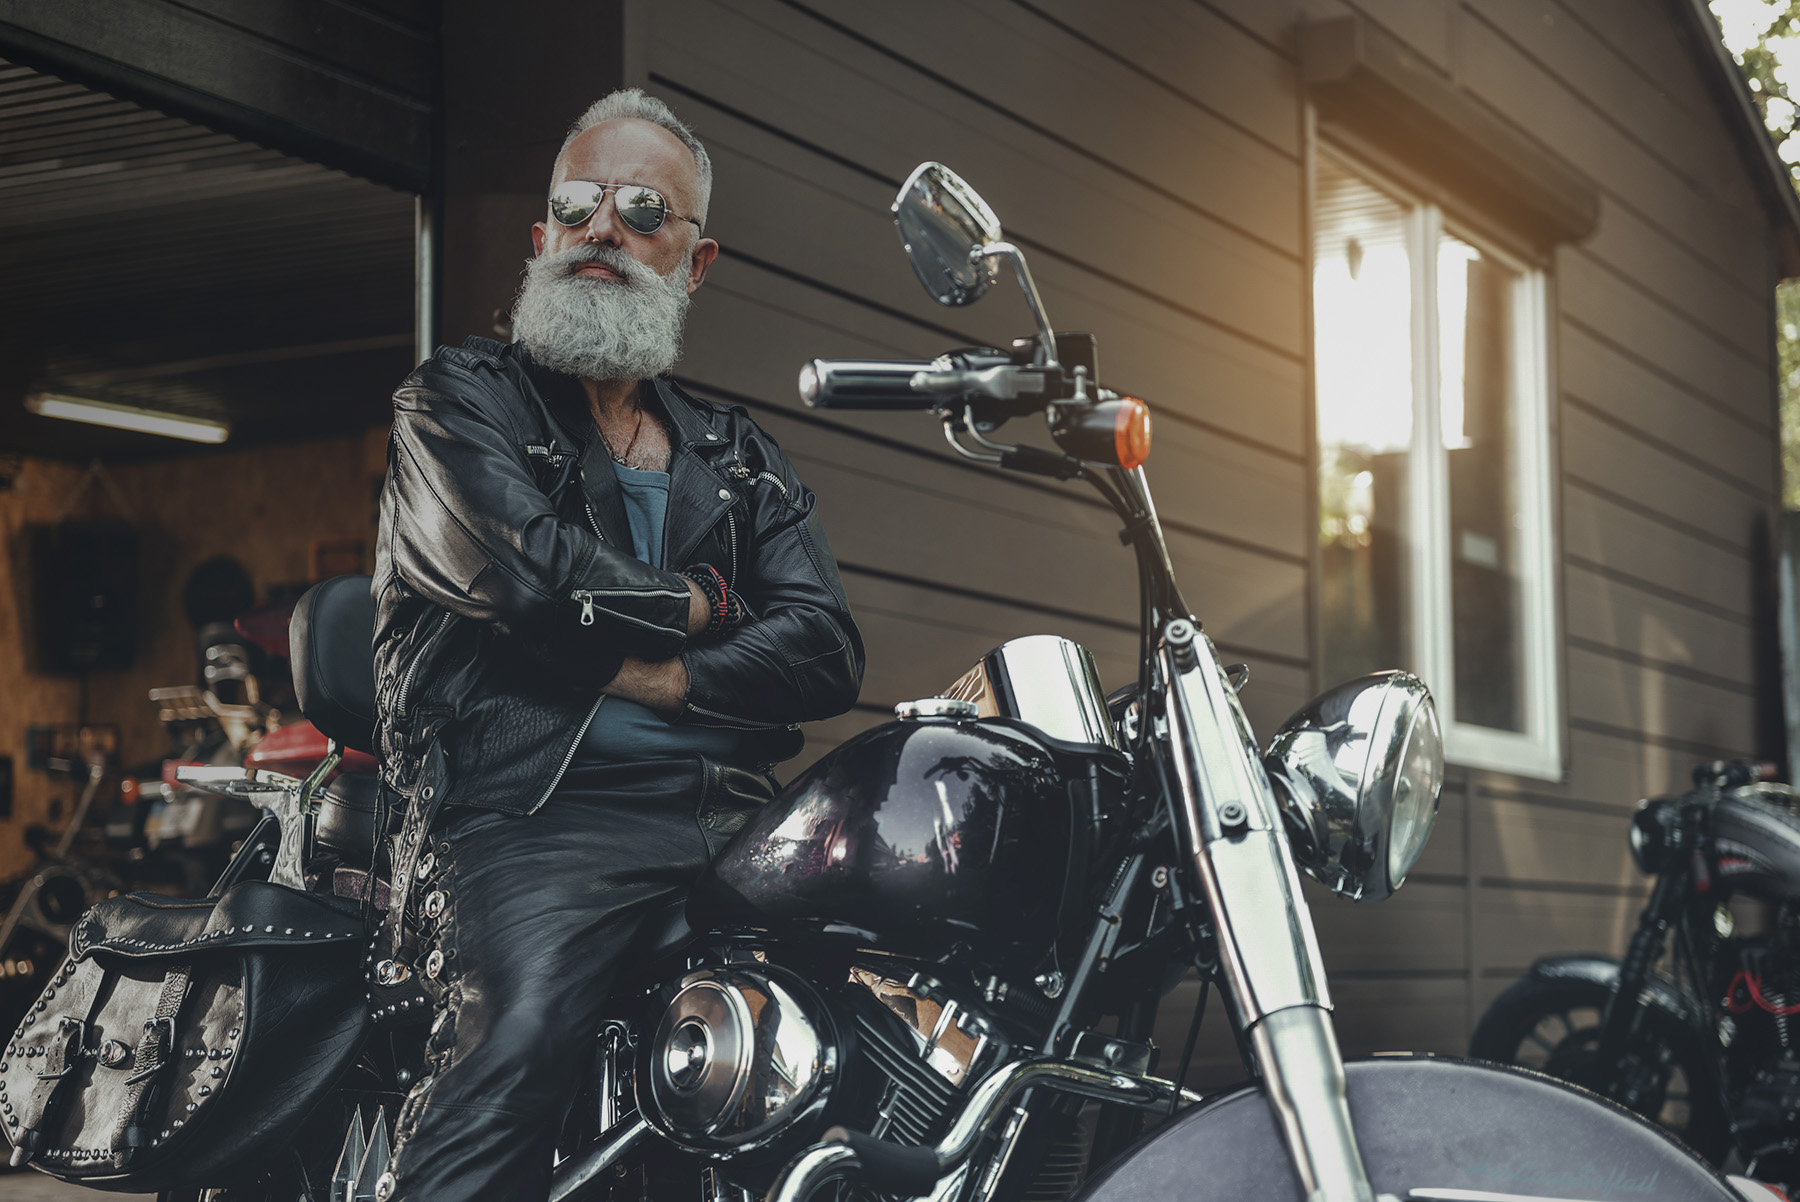 Concentrated aged biker in goggles is sitting at motorbike. He wearing leather jacket. Portrait. Low angle